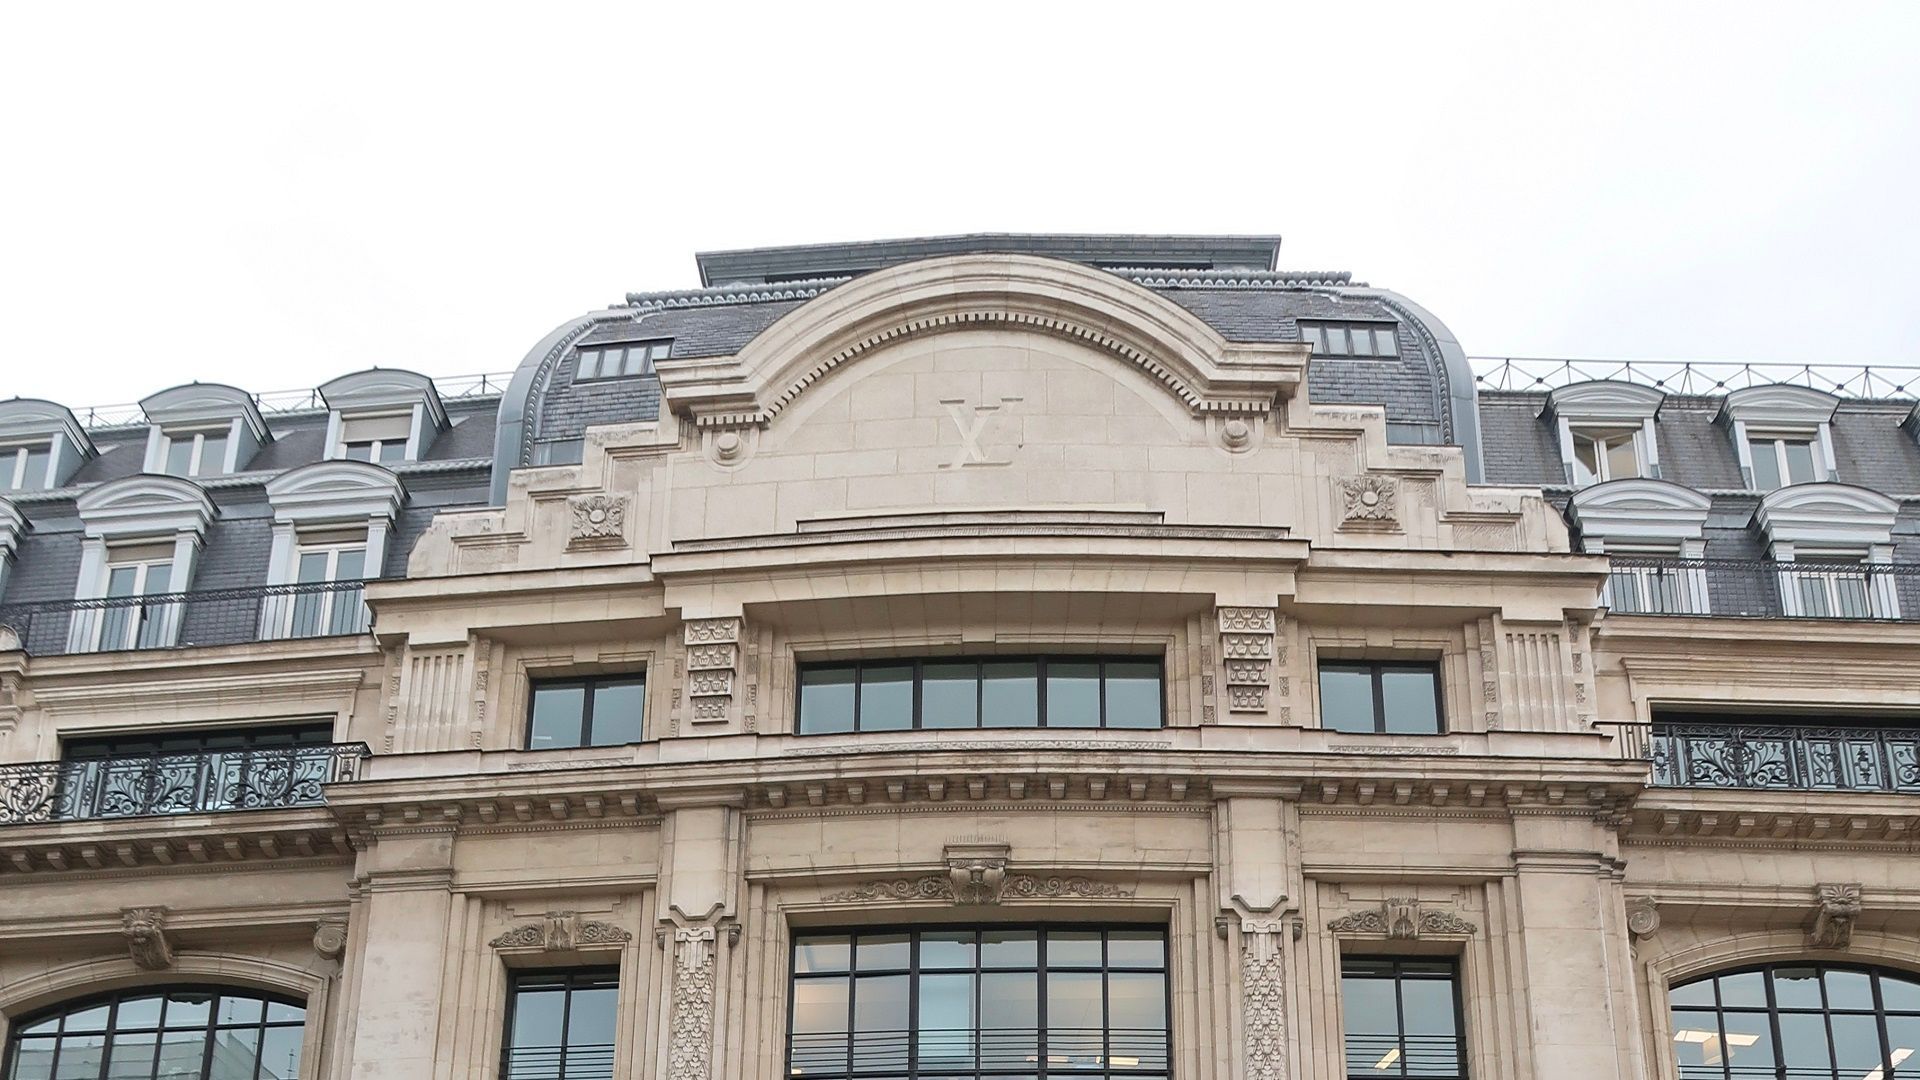 Louis Vuitton Is Opening Its Own Luxury Hotel At Its Paris Headquarters!